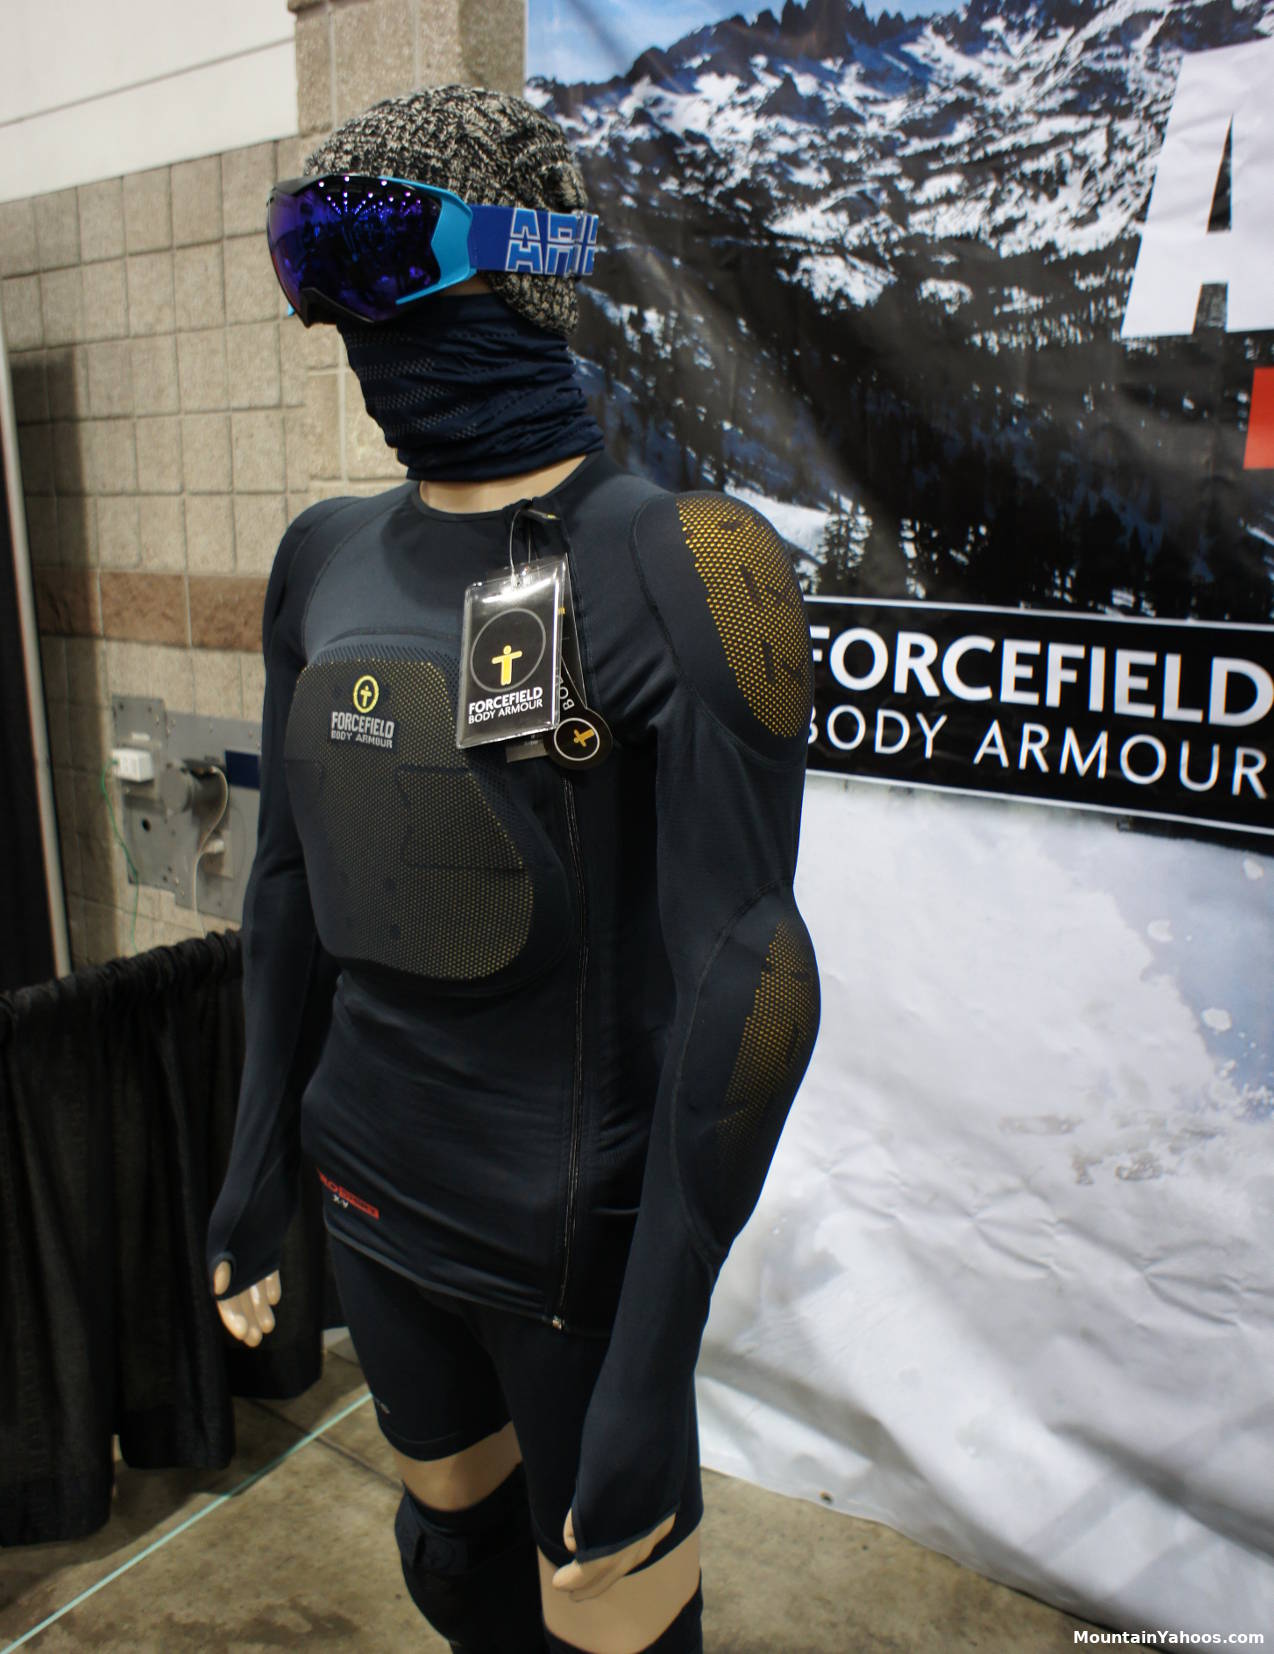 Forcefield shirt and shorts C2 rated body armour